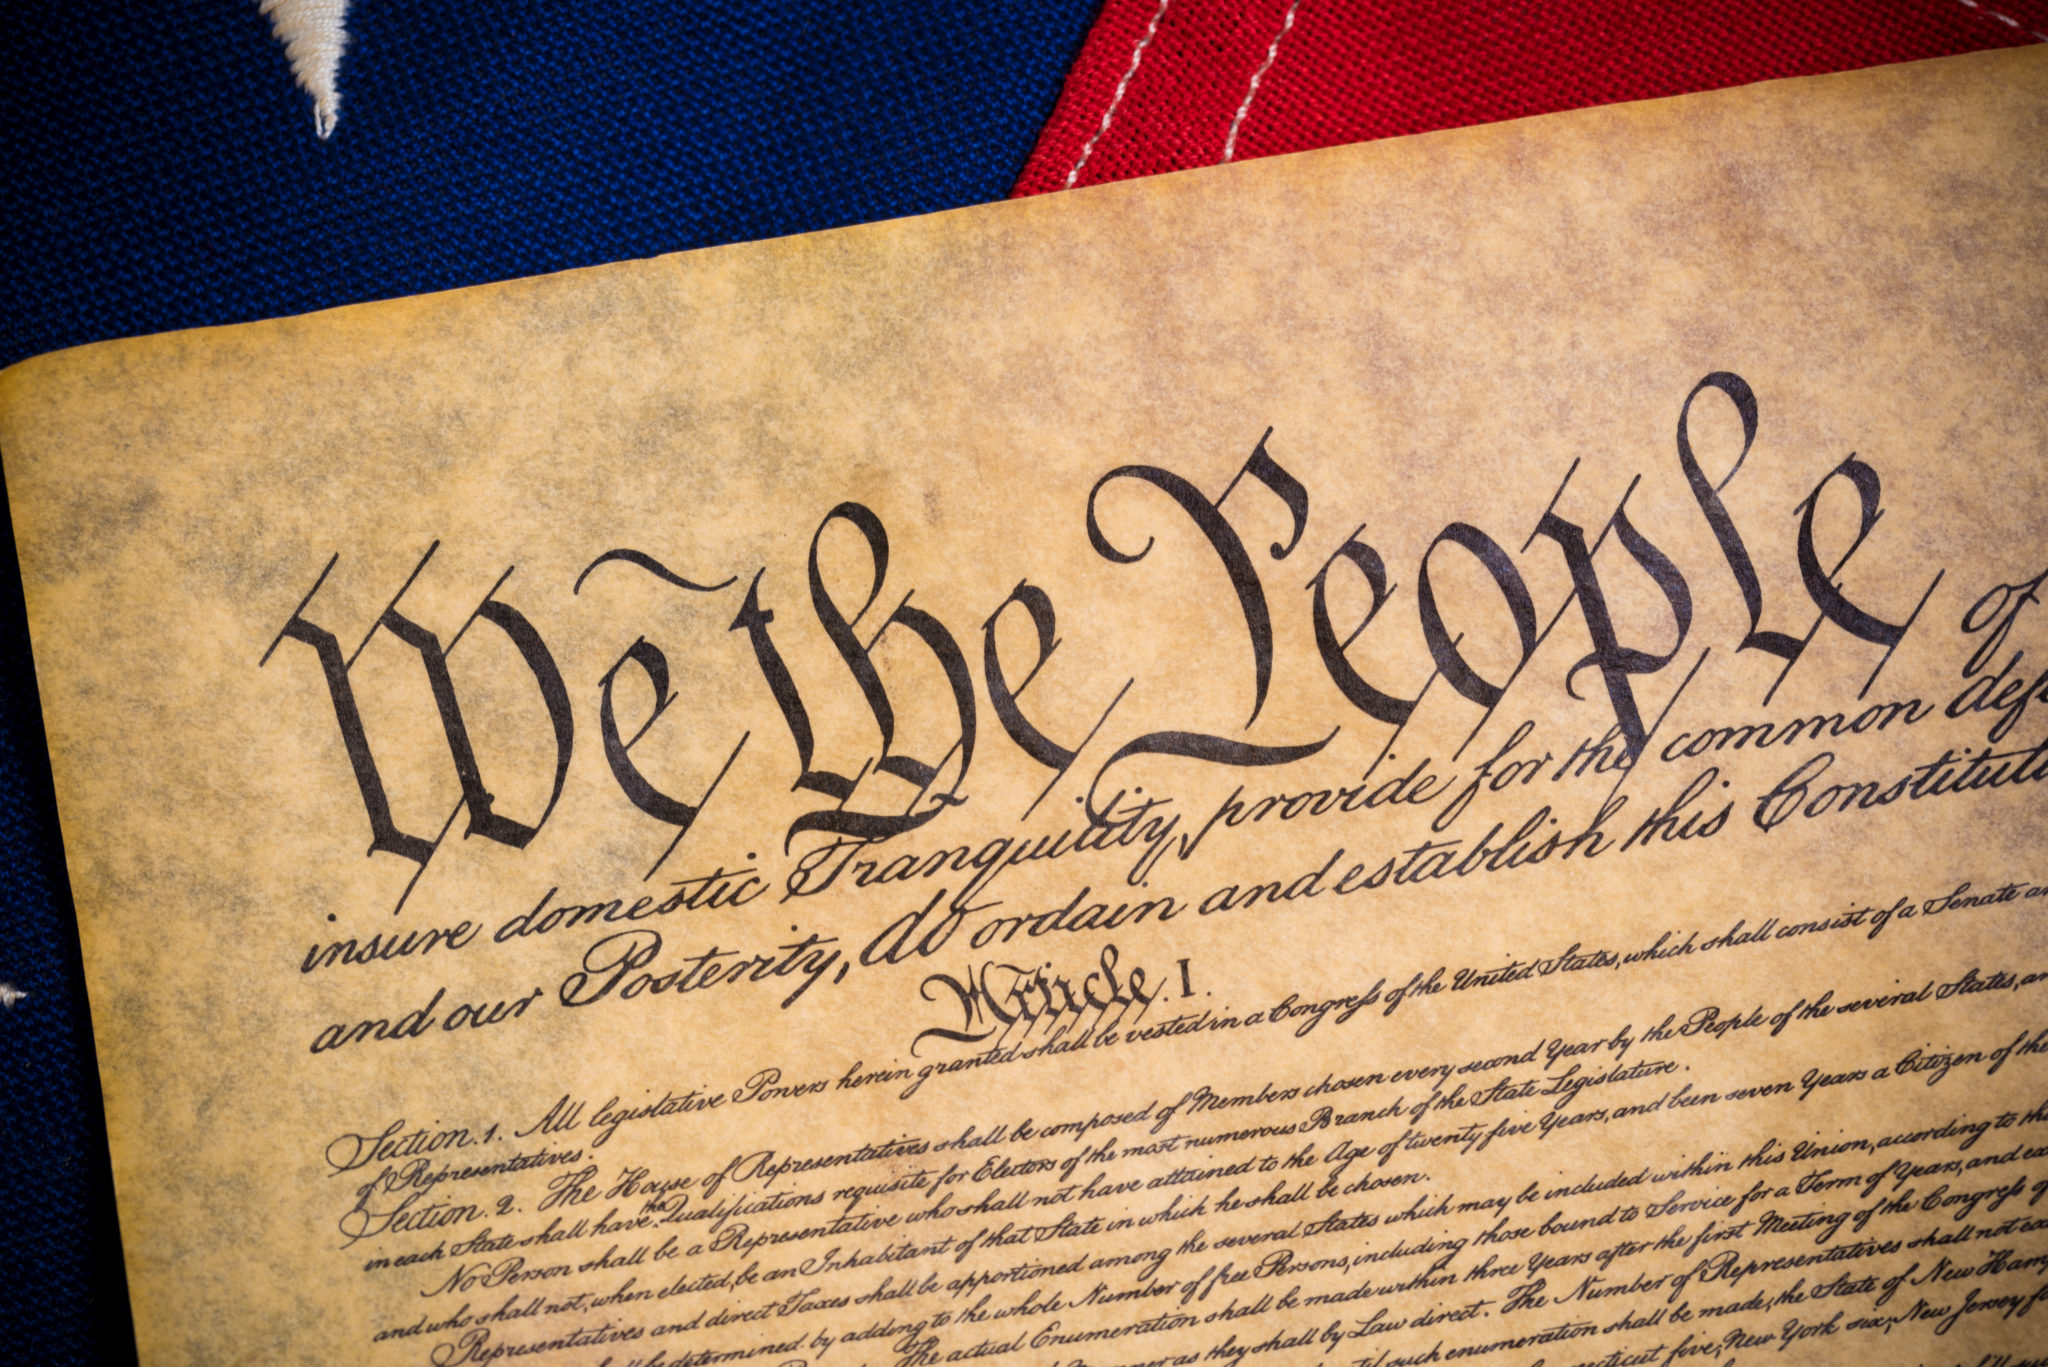 Constitution - We the People of the United States